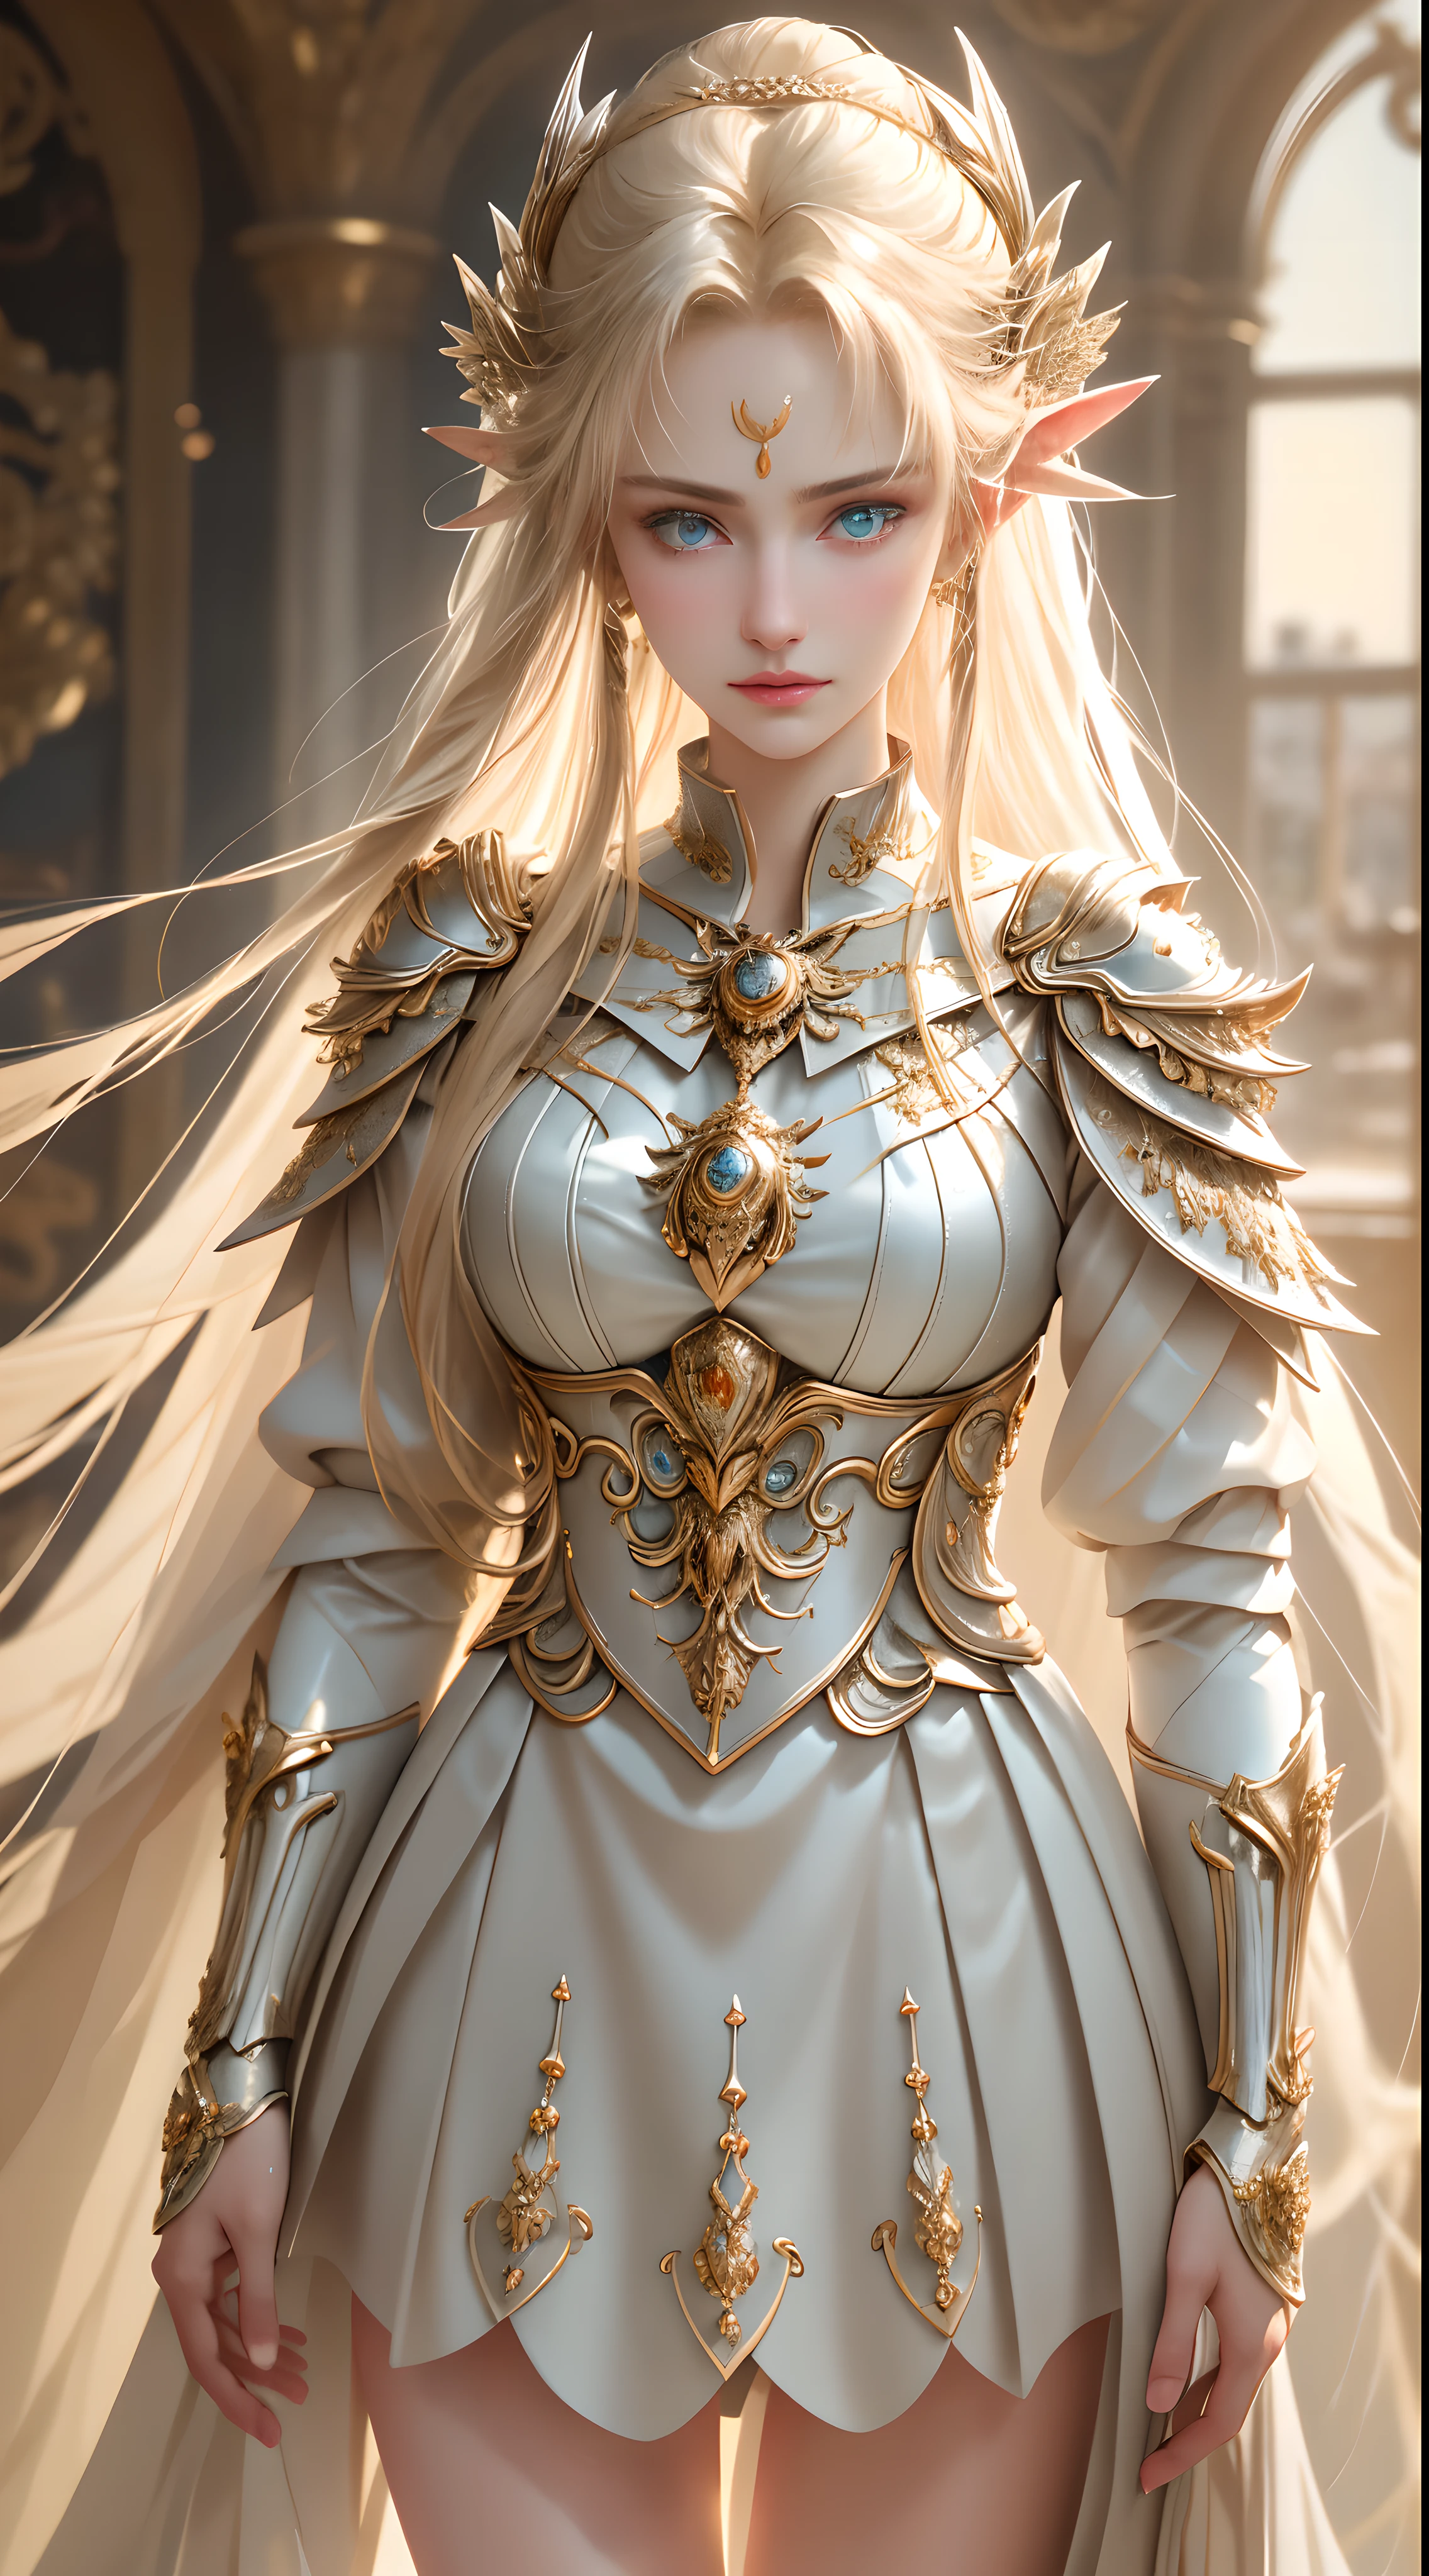 8K Ultra HD，original photo，Elf girl in silver armor，skirt armor，beautiful girl，long white hair，Blonde hair, blue eyes，The face is very delicate，delicate skin，plump breasts，crystal clear lips，Slender legs，(real human:1.3)，(high resolution:1.4)，(detailed:1.5)，(lifelike:1.7)，original photo，portrait photos，real human，original photo，超high resolution，photorealism，best quality，(High detail skin，Skin details)，Visible pores，skin shiny，masterpiece，，fine details，Coloring，extremely delicate and beautiful，Extremely detailed 8k wallpaper，8K high quality，digital monocular，girl with beautiful details，(looking at the audience)，Professional photography lighting，Vision，Full body image，panoramic